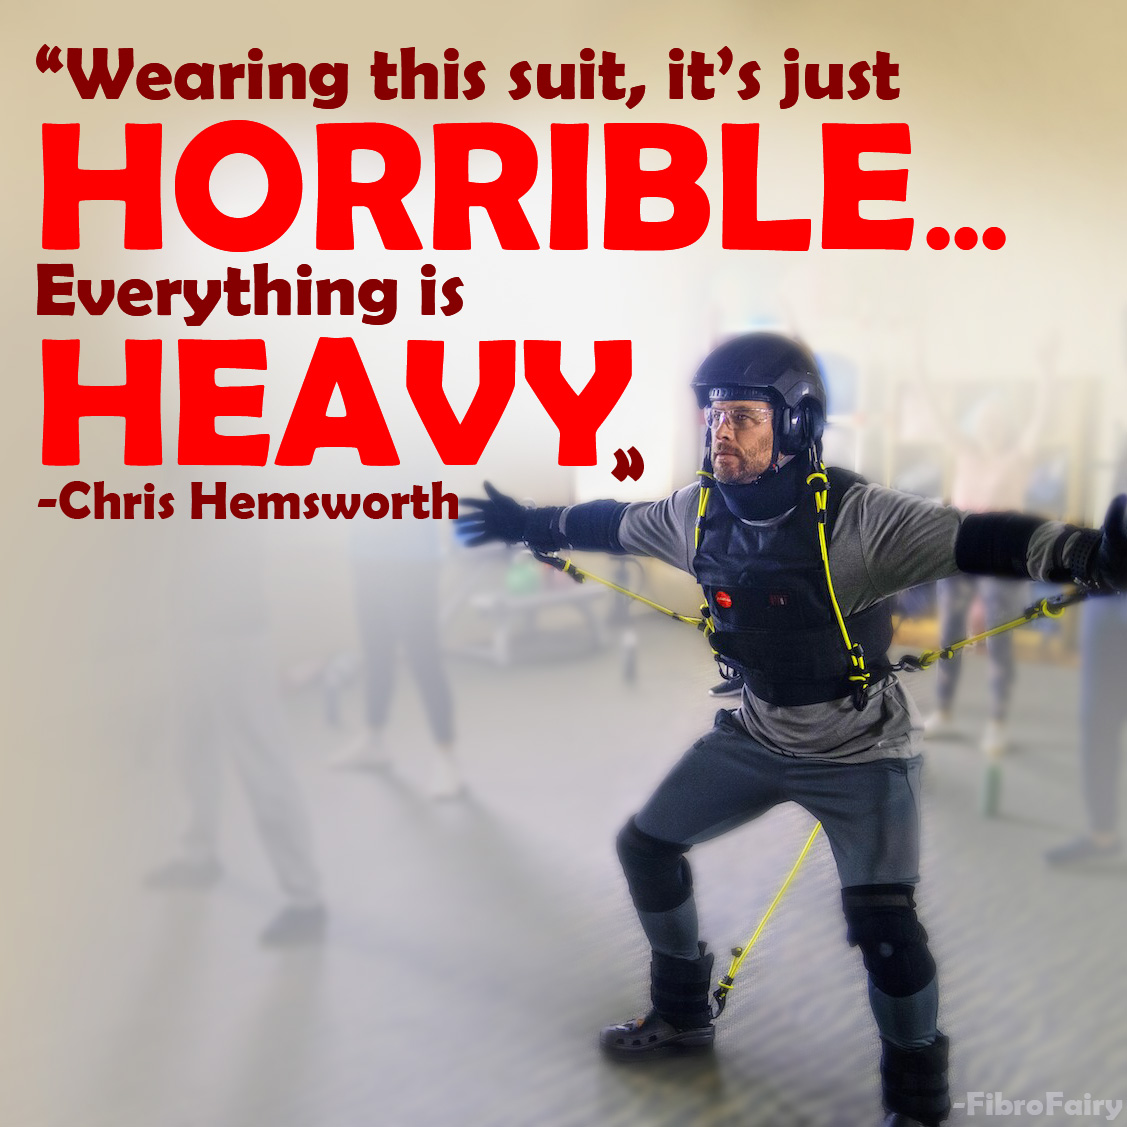 Watching @chrishemsworth on #Limitless wear a suit mimicking old age was eye-opening.
It visualizes the fatigue we feel with #Fibromyalgia.
On top of our pain, fatigue plagues us, no matter our age.
#ChronicPain is beyond just #Pain—usually goes hand in hand with #ChronicFatigue.